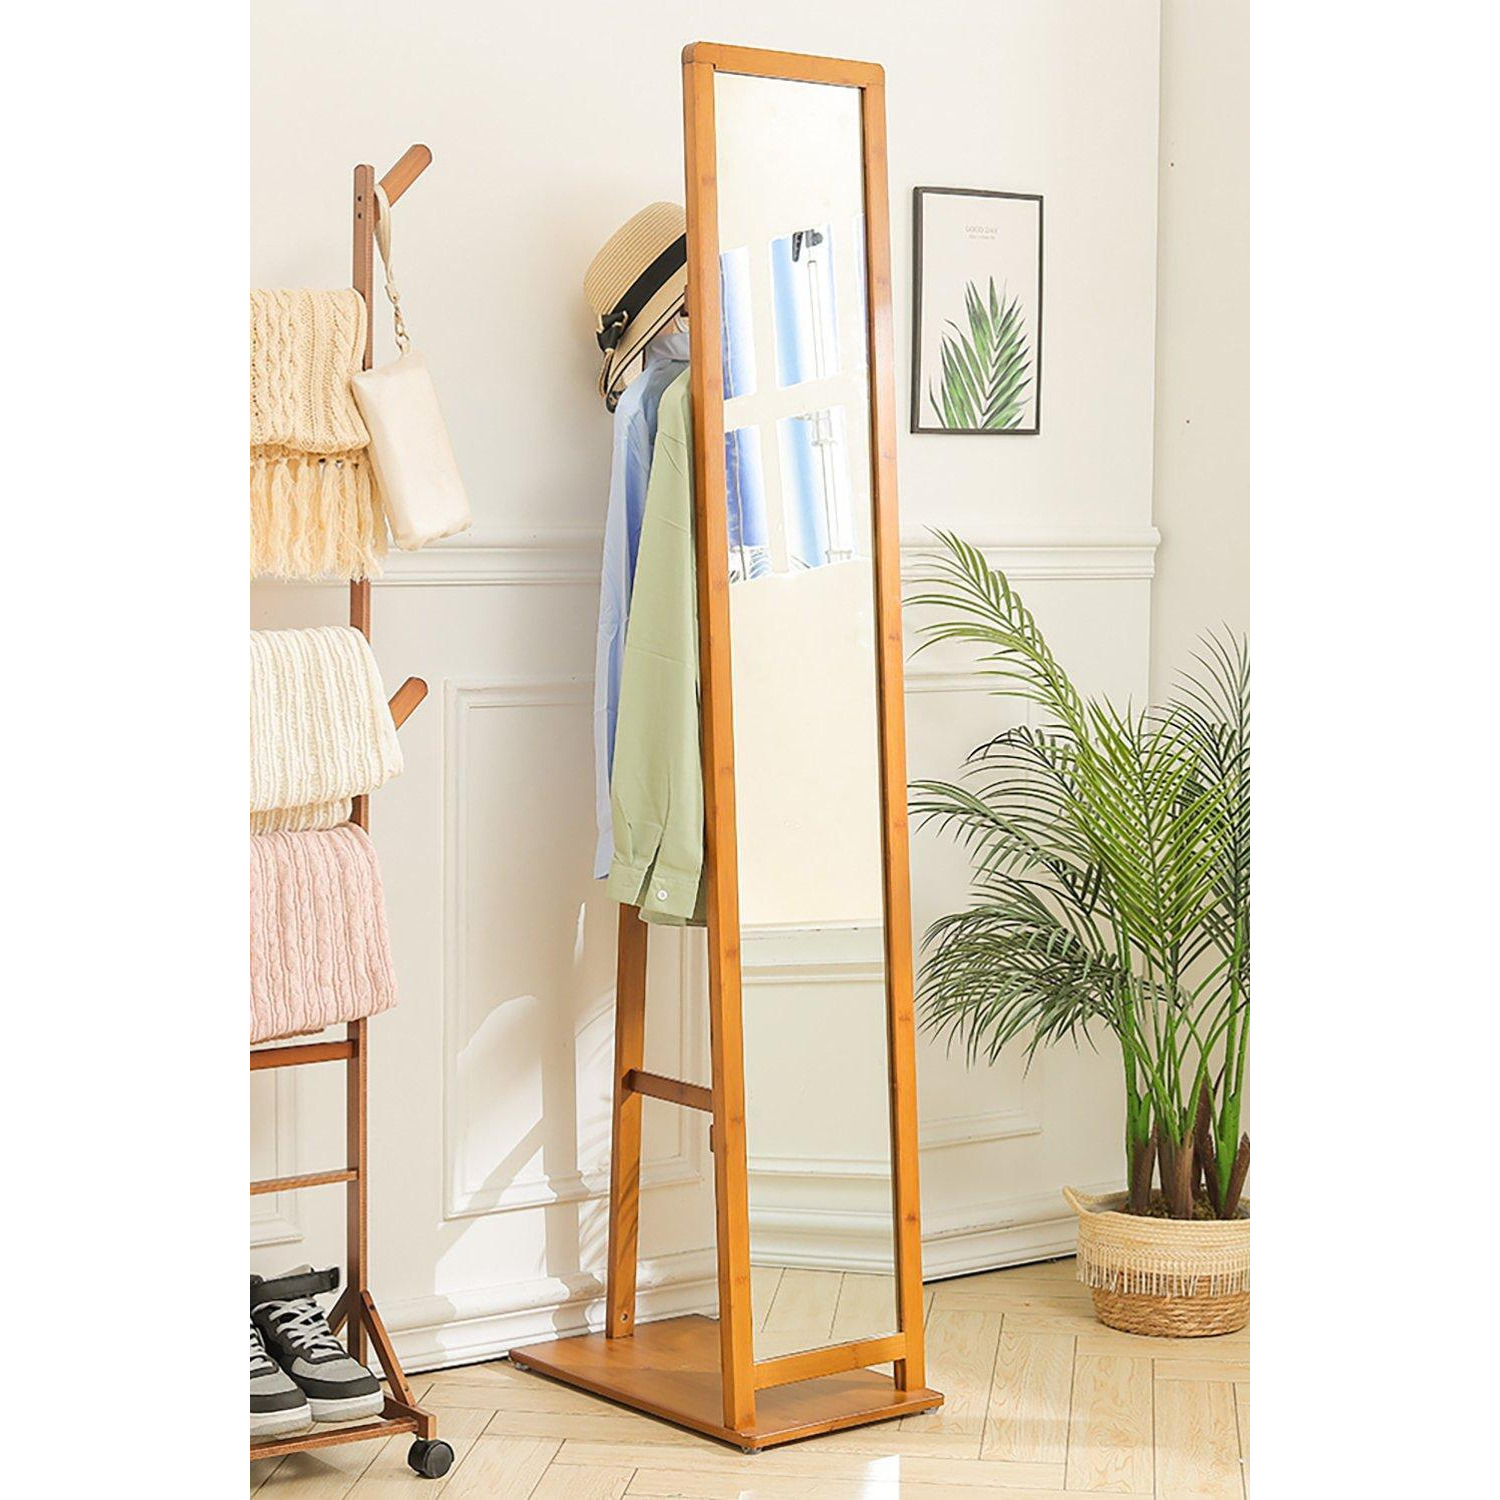 Free Standing Full Length Mirror with Clothes Rack - image 1